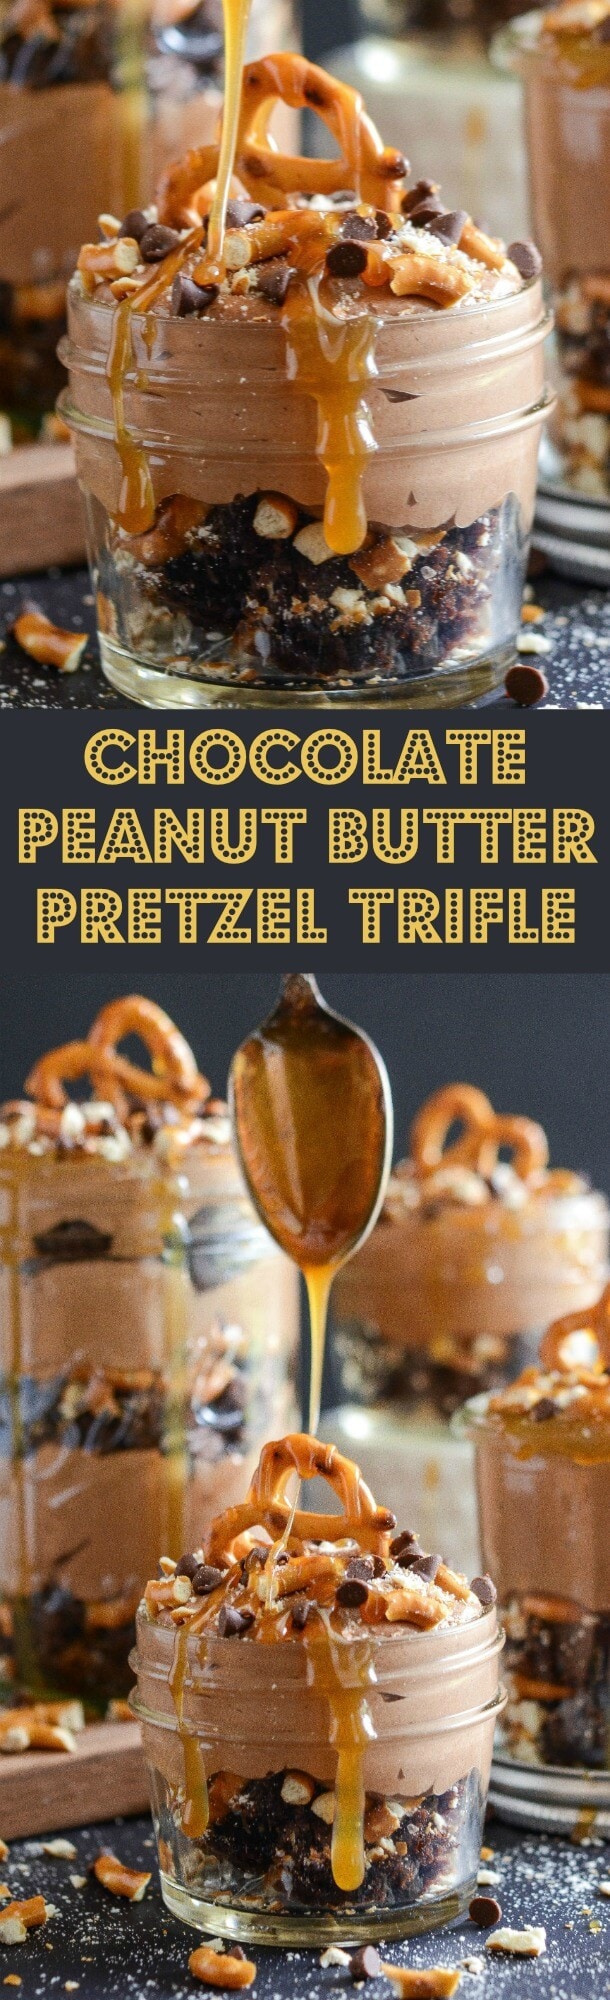 Chocolate Brownie Peanut Butter Pretzel Trifle topped with Caramel Sauce! Salty and Sweet!